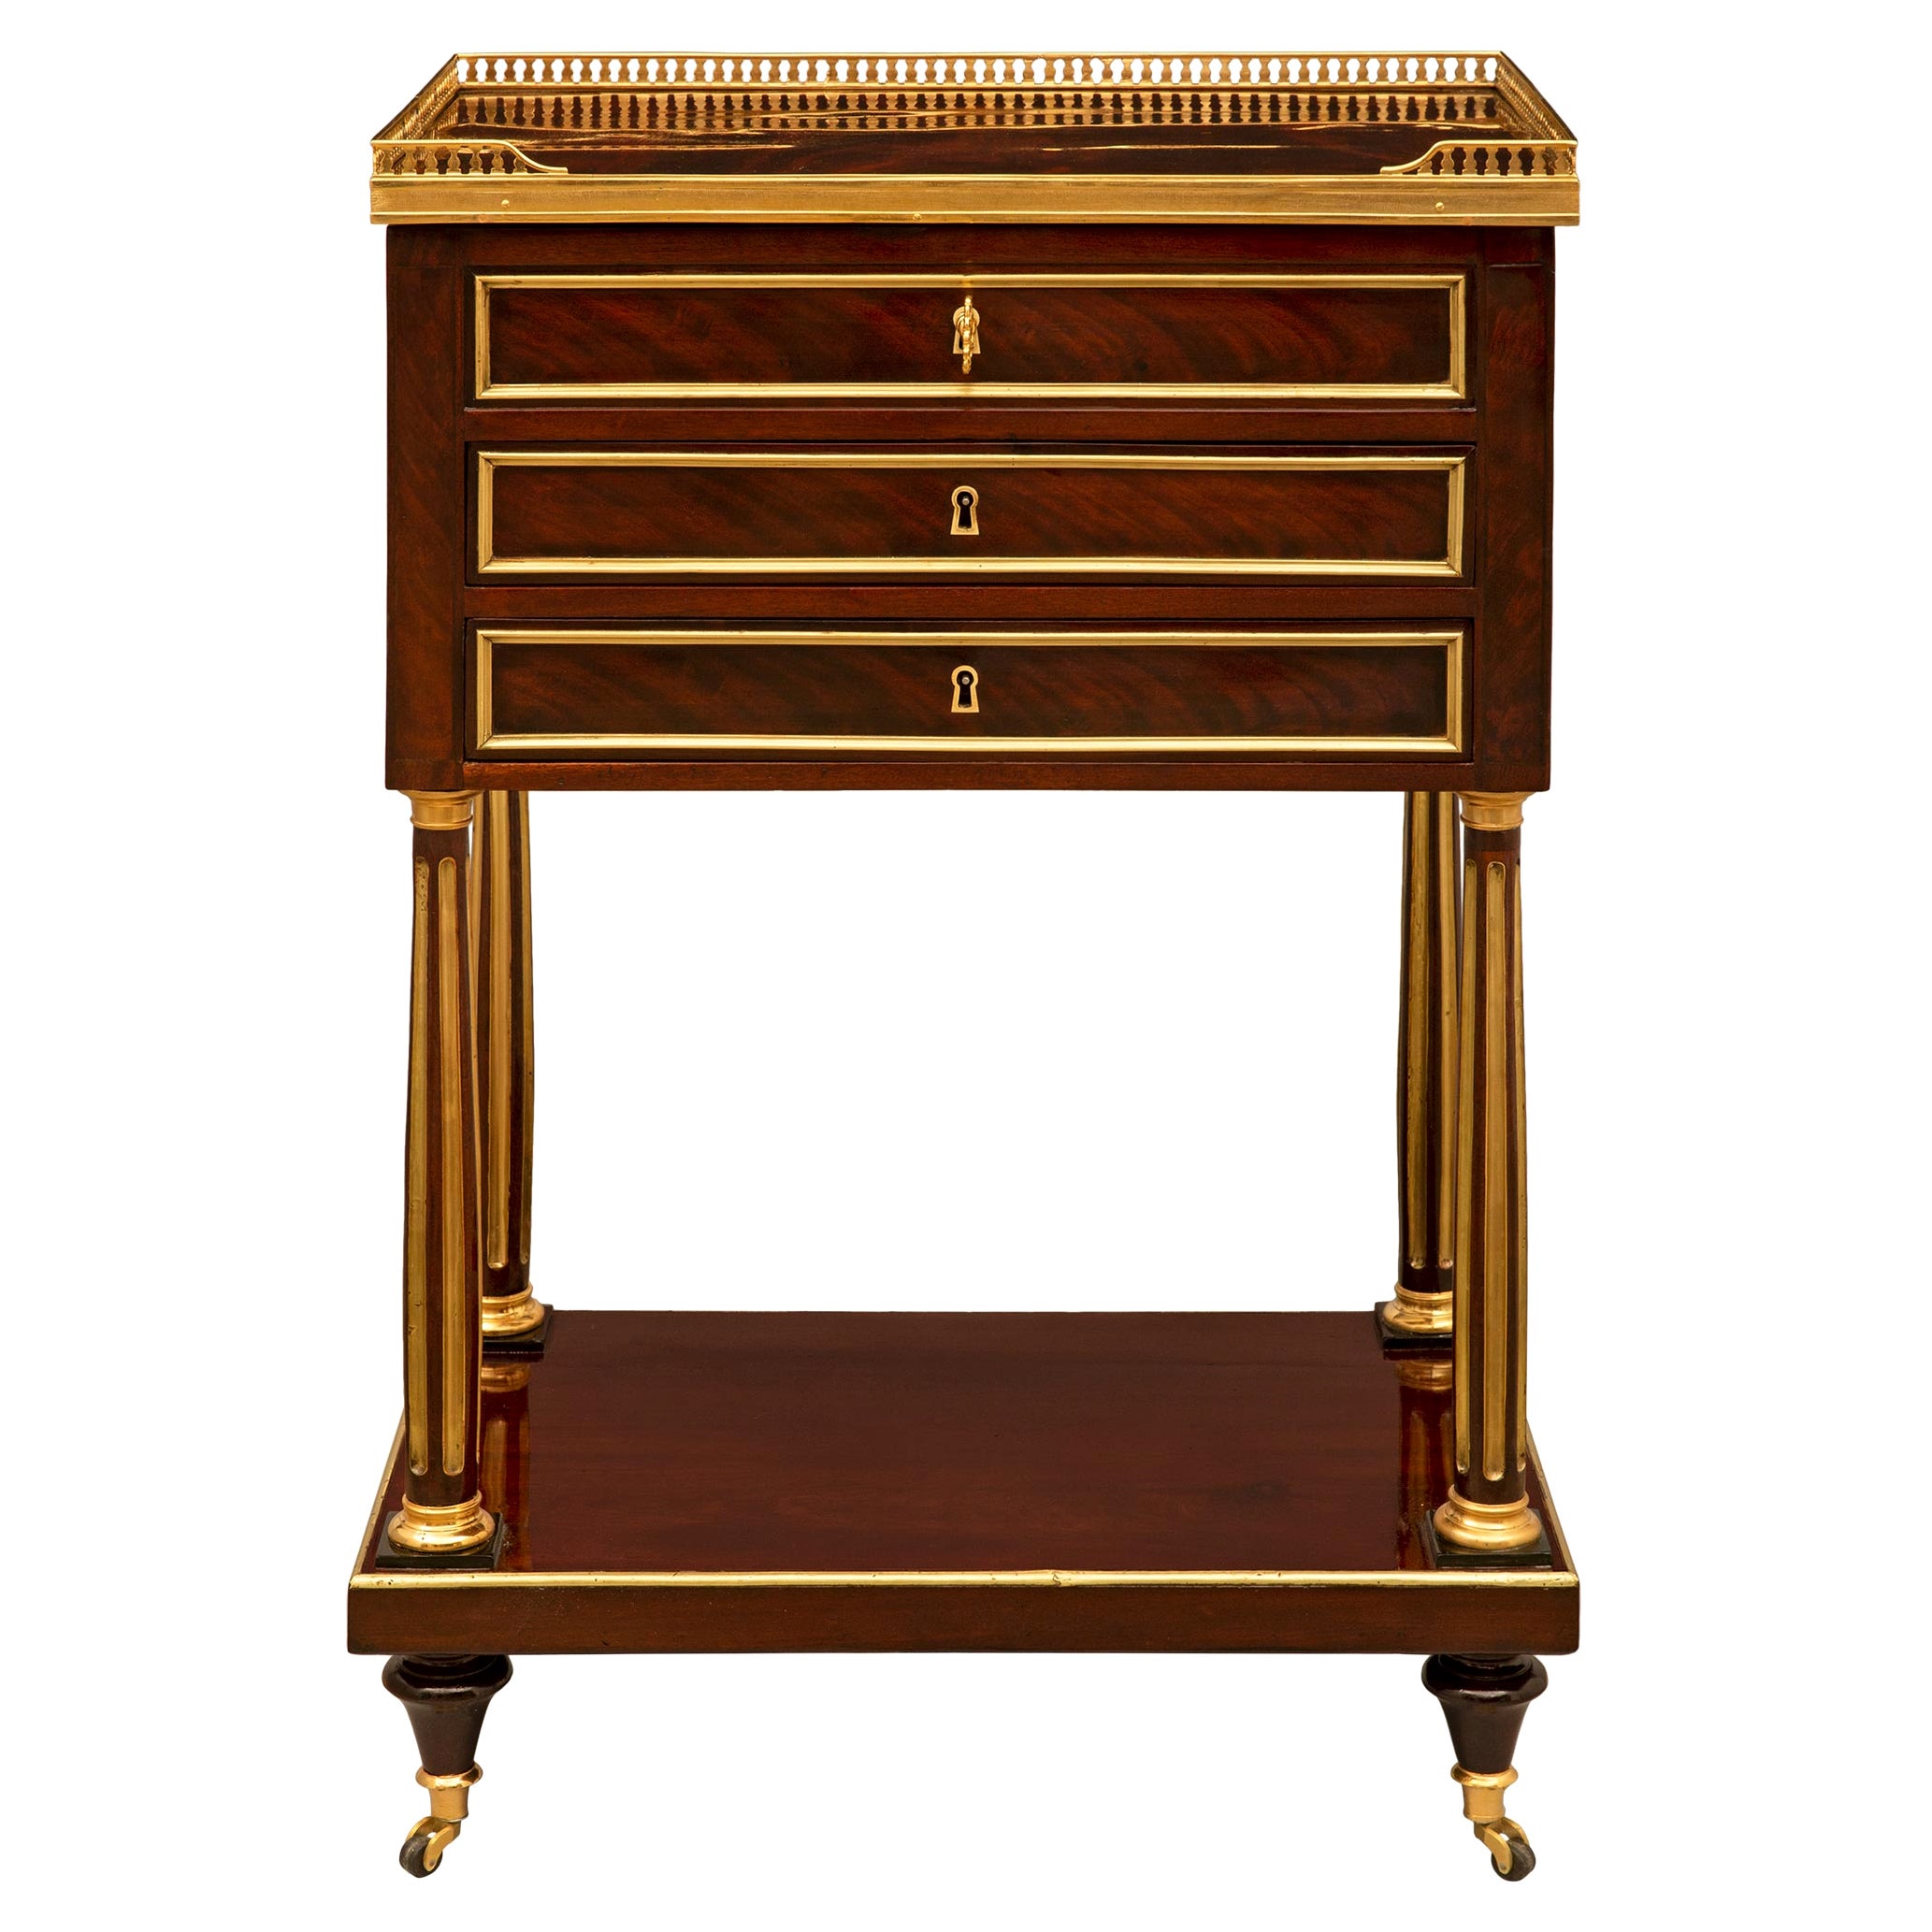 French 18th Century Louis XVI Period Mahogany and Ormolu Vanity/Side Table For Sale